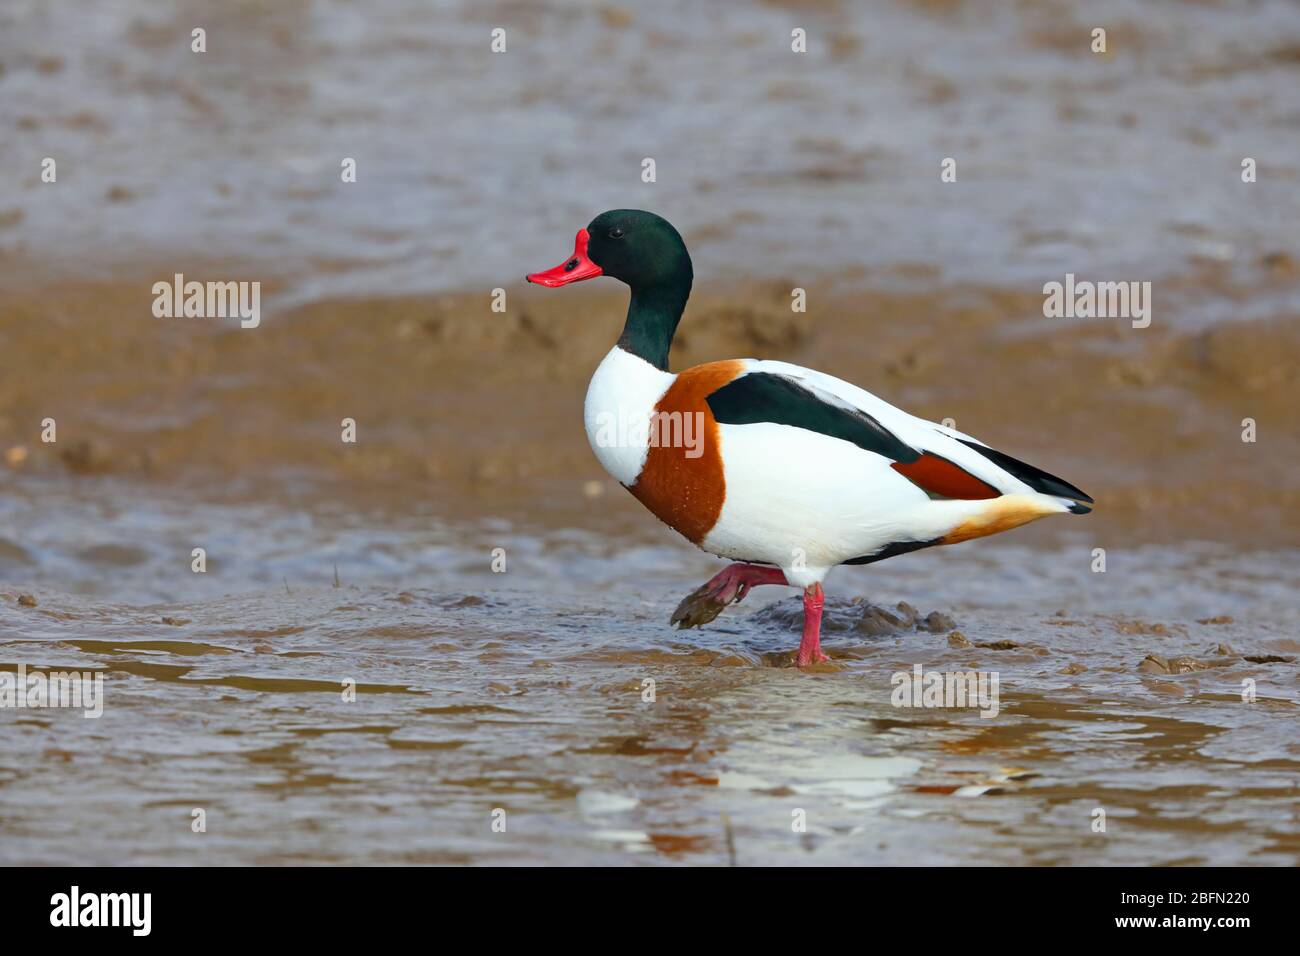 An adult male Common Shelduck (Tadorna tadorna) in breeding plumage feeding on an estuary in East Anglia, UK in late winter/early spring Stock Photo